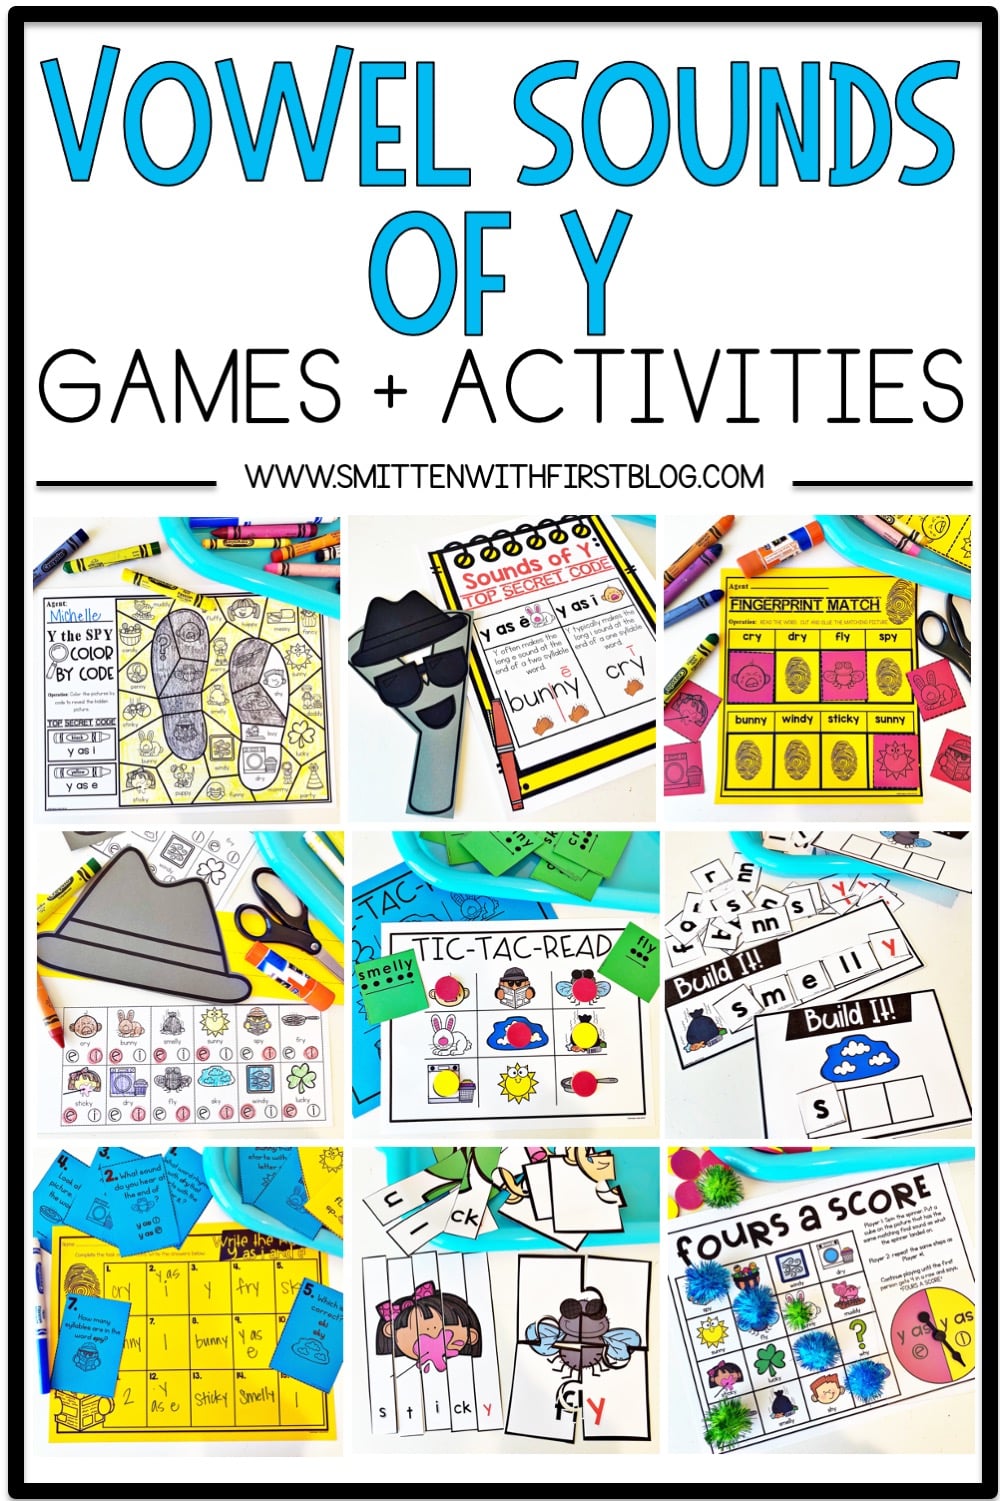 Vowel Sounds of Y Games and Activities